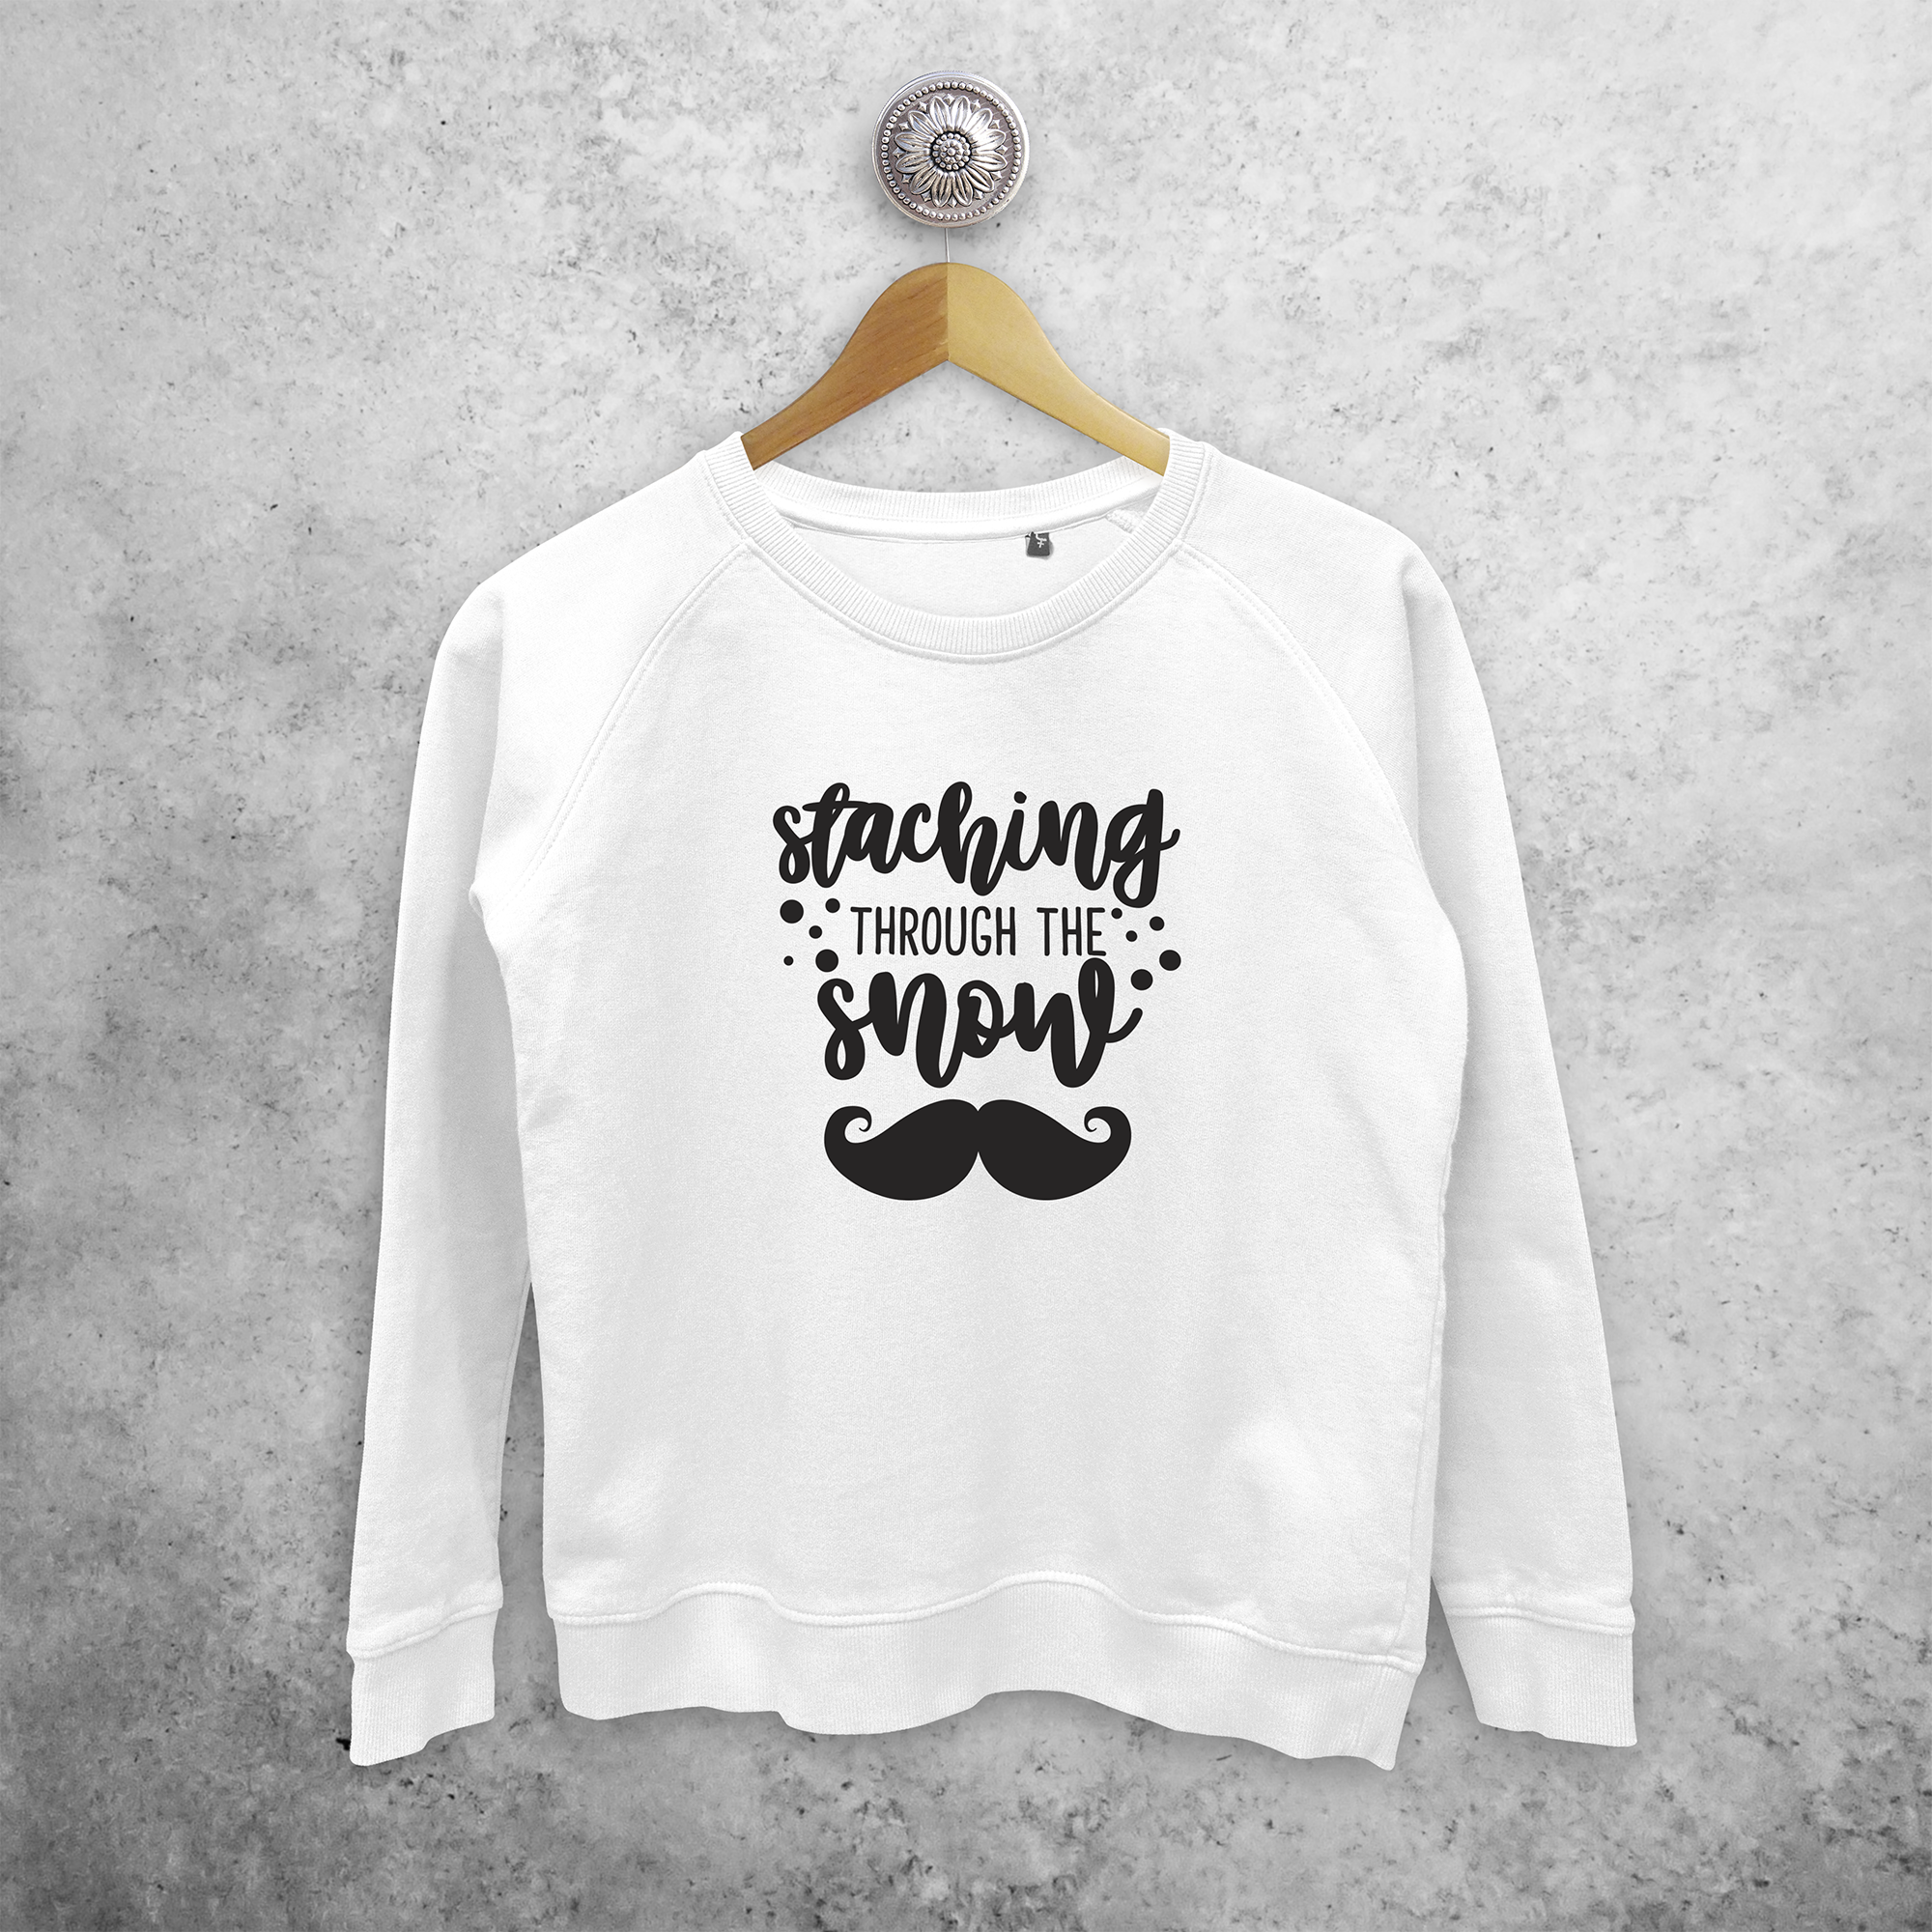 Adult sweater, with ‘Staching through the snow’ print by KMLeon.